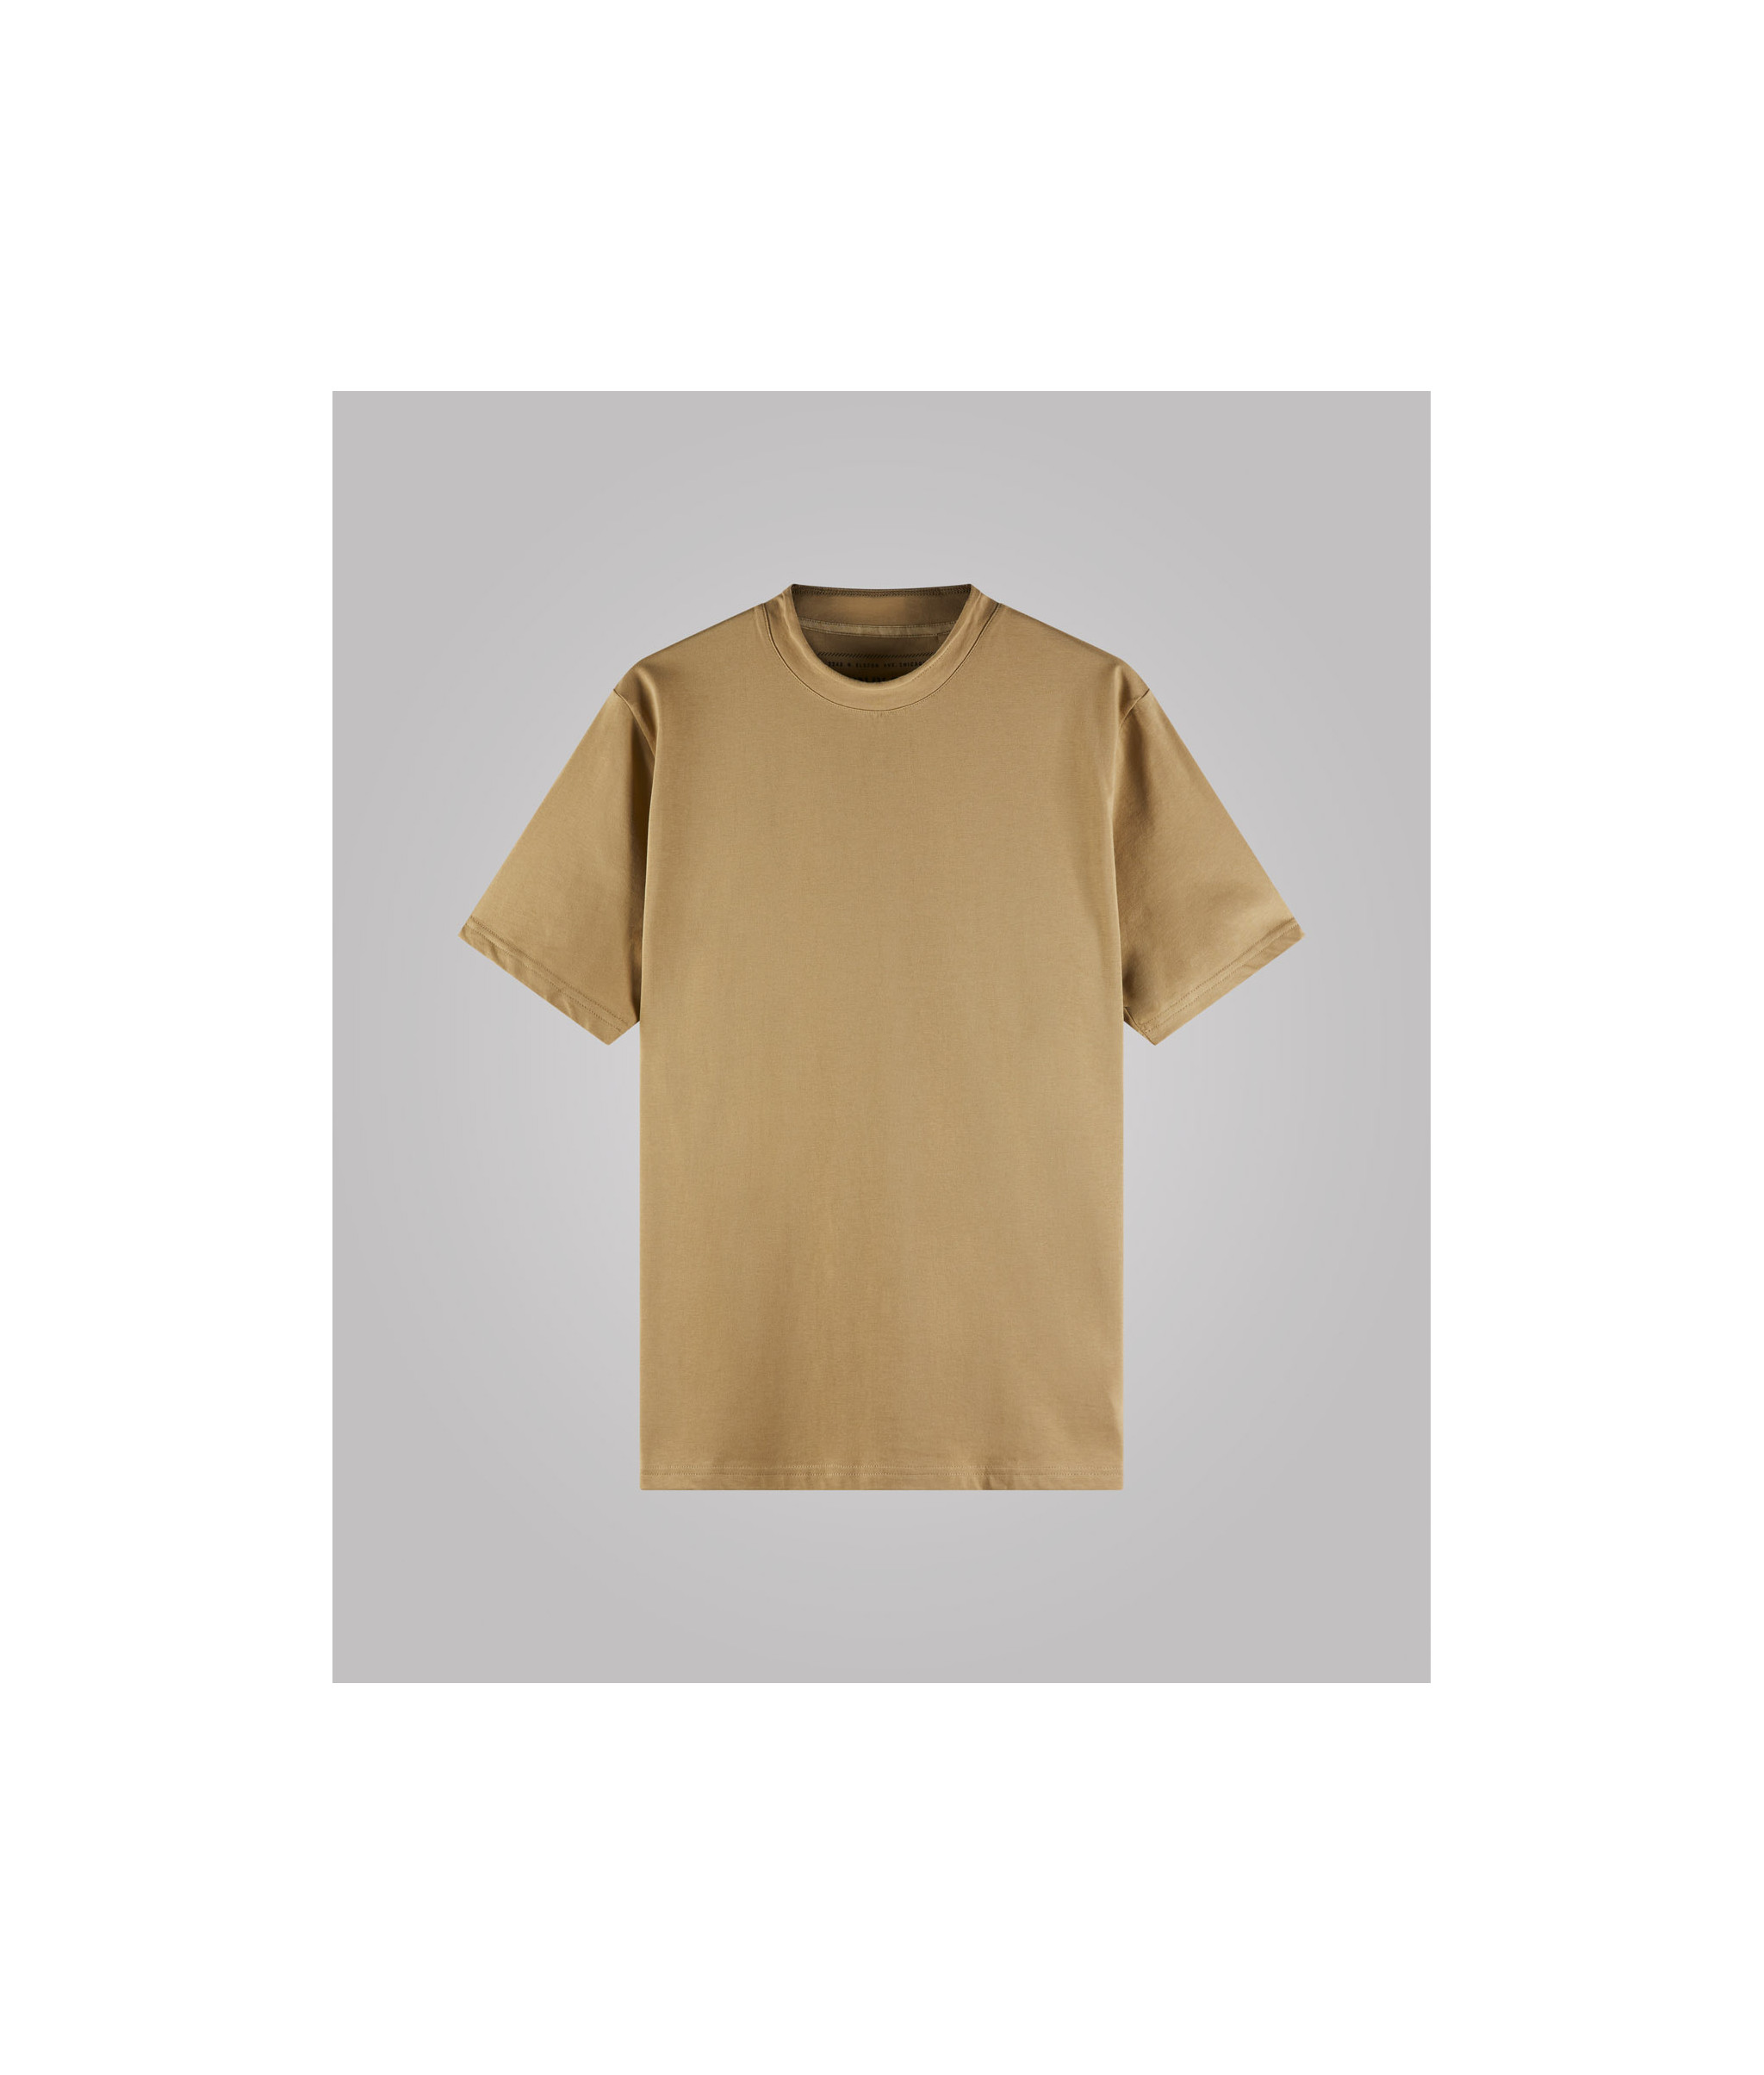 Taking street style up a notch U AIRism cotton oversized tshirt is all  about the trend and the comfort that comes with it Featuring a  Instagram